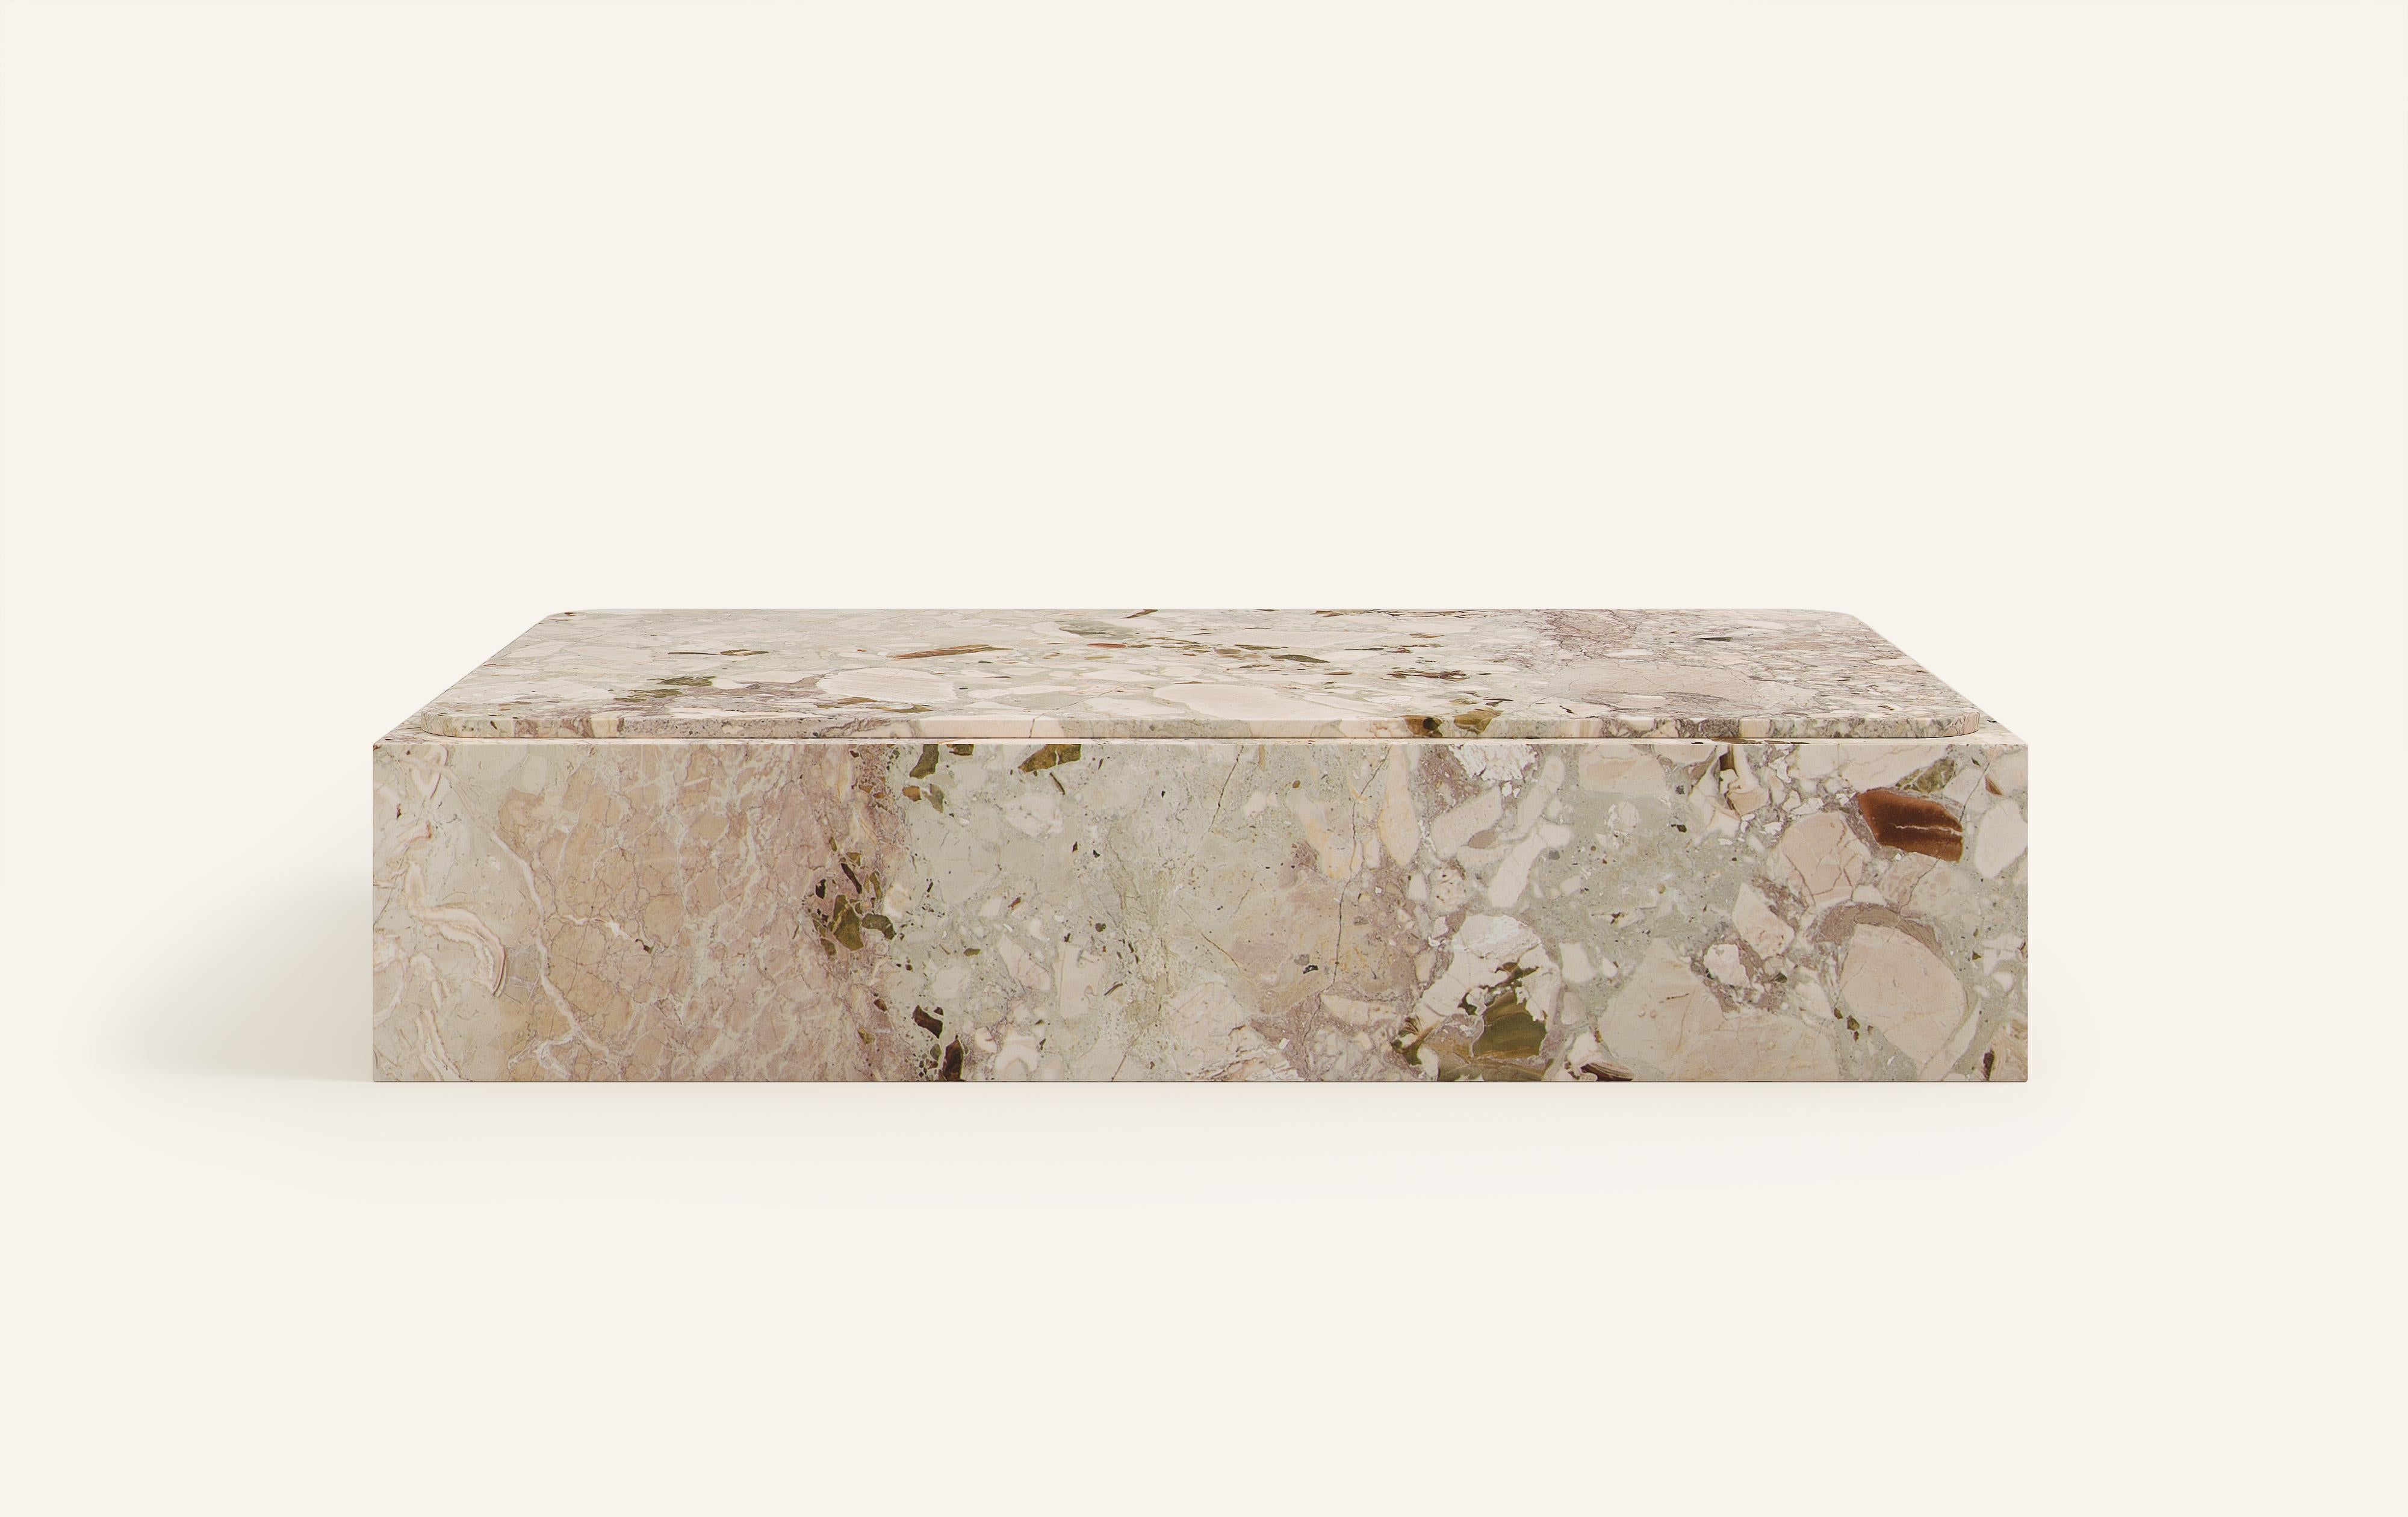 MONOLITHIC FORMS SOFTENED BY GENTLE EDGES. WITH ITS BOLD MARBLE PATTERNS CUBO IS AS VERSATILE AS IT IS STRIKING.

DIMENSIONS:
72”L x 42”W x 13”H: 
- 3/4